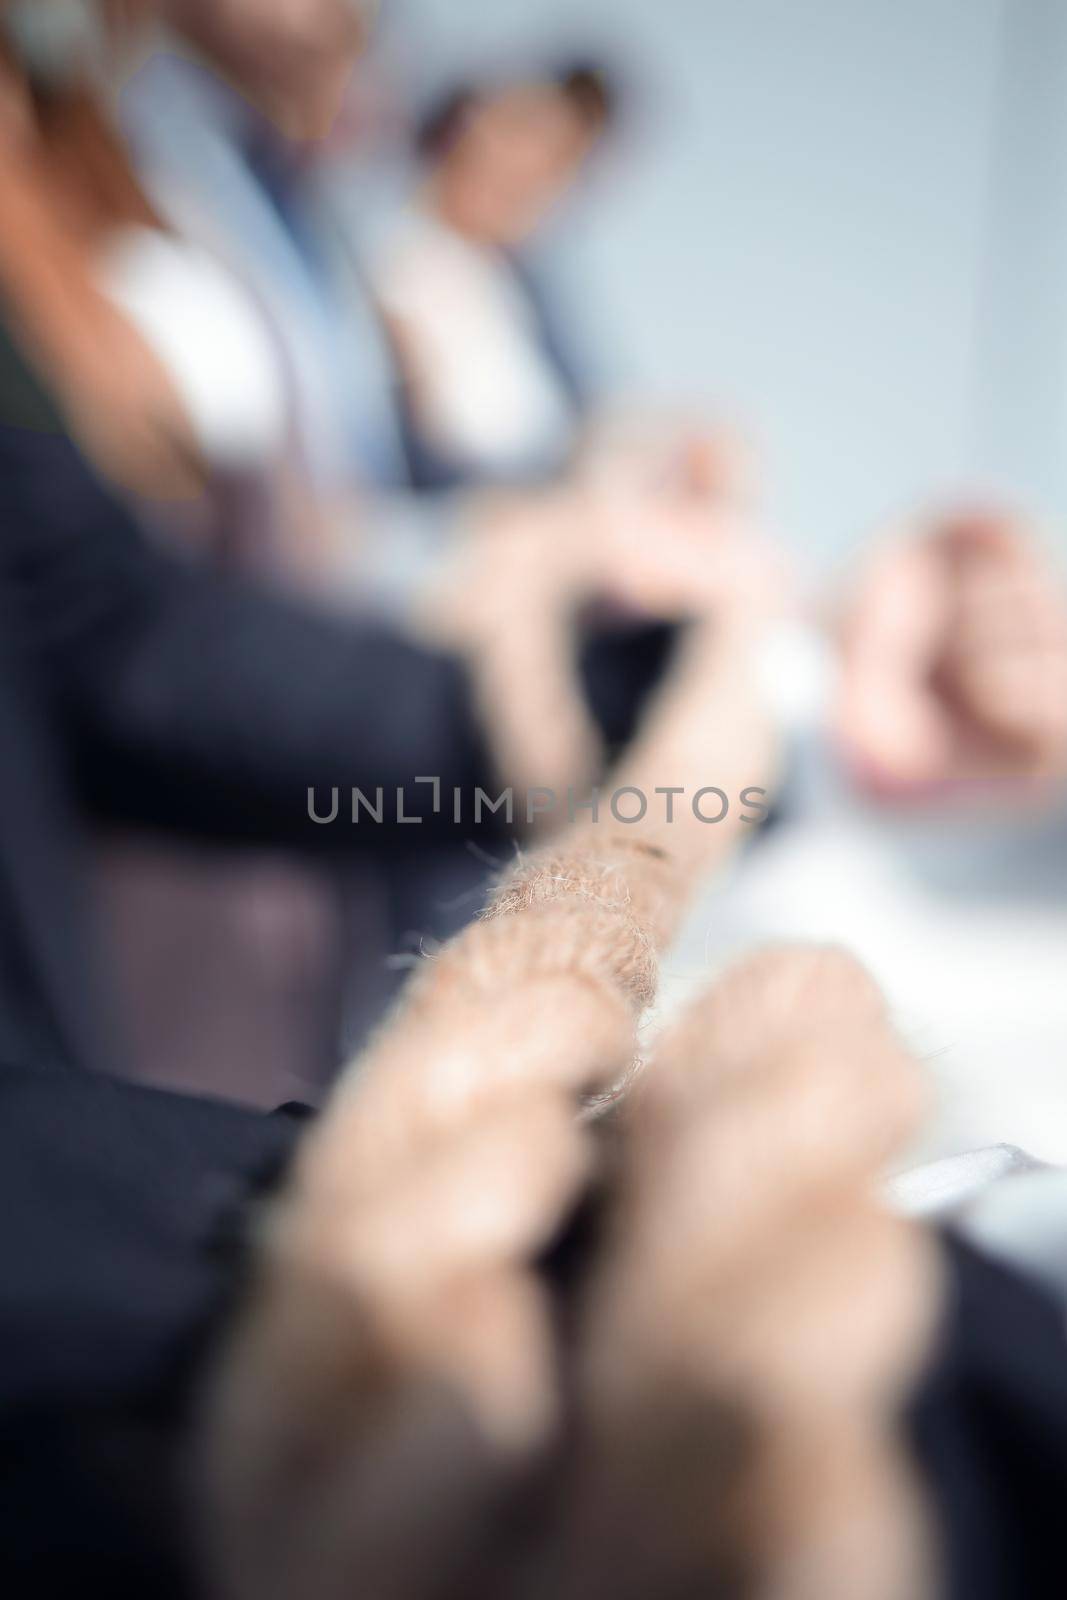 People holding rope together on light background, closeup of hands. Unity concept